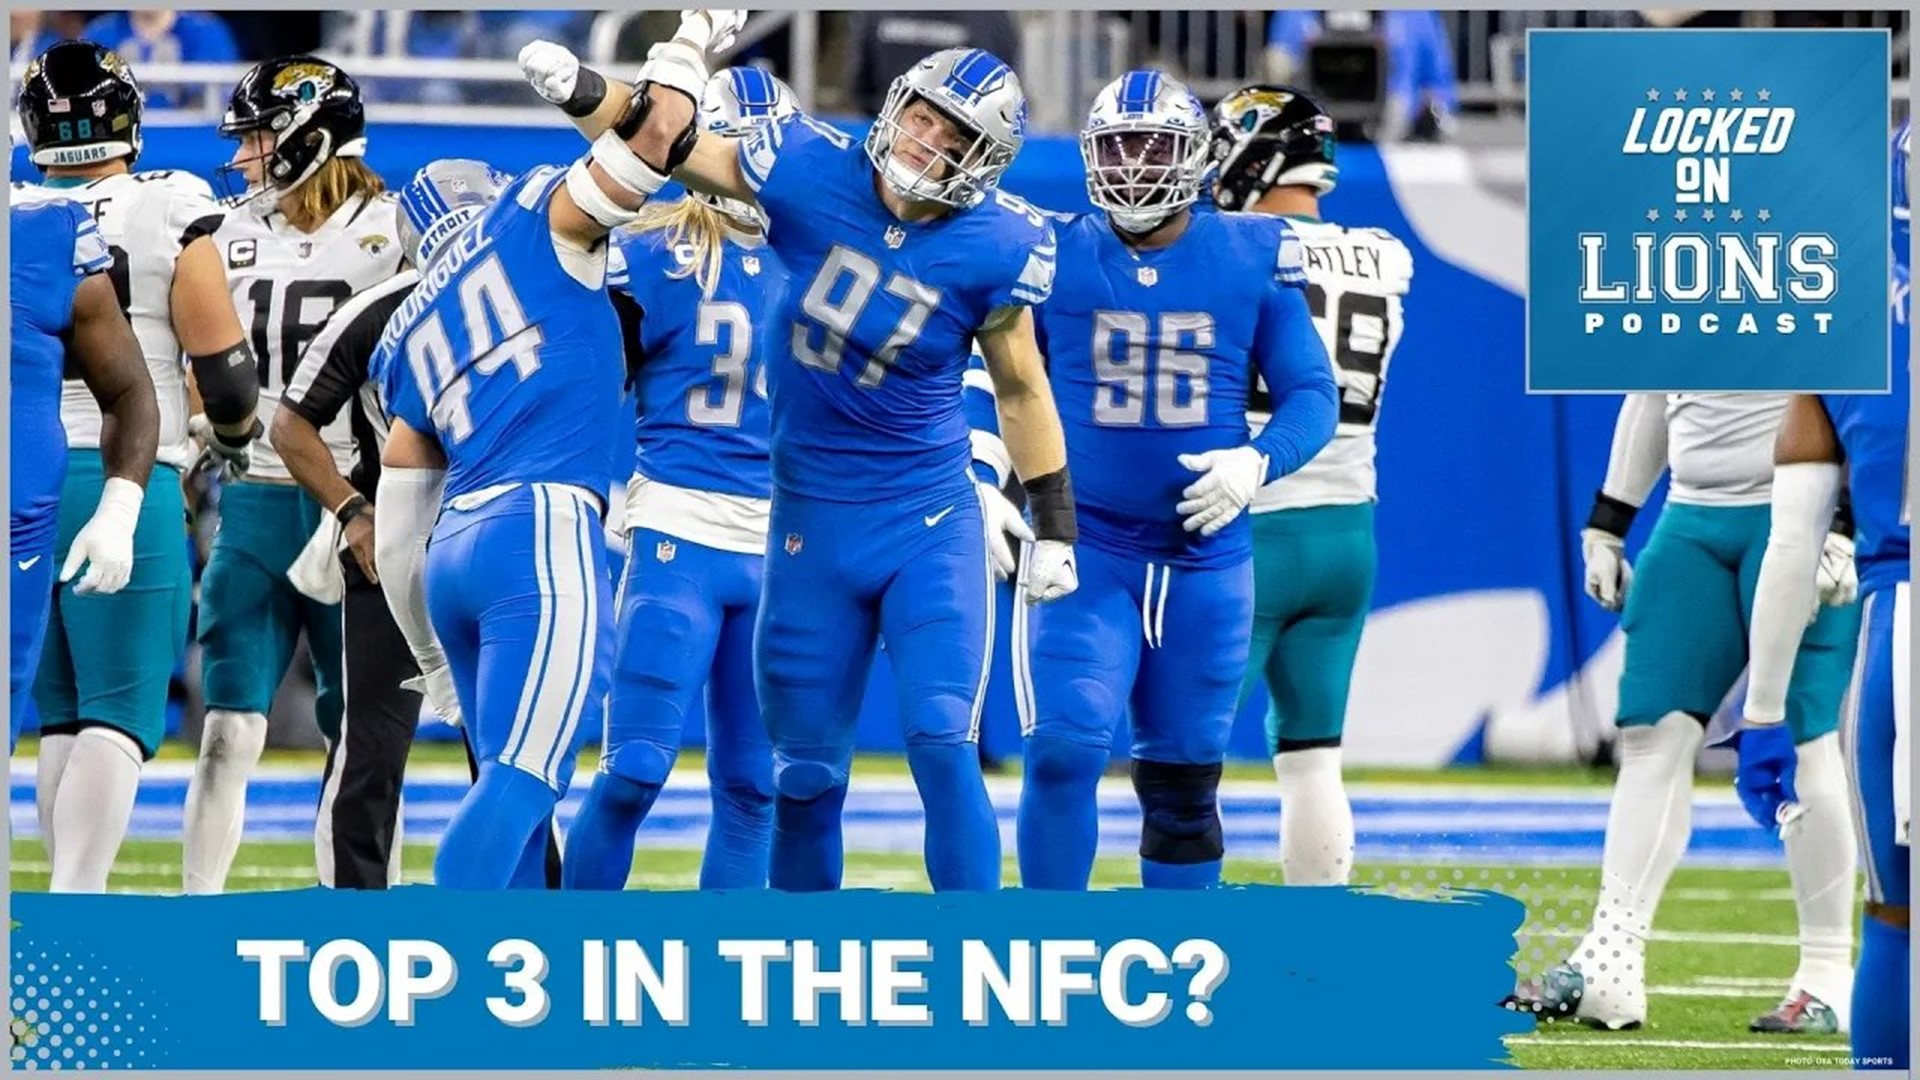 Could the #Lions have a Top 6 team right now? Peter King says yes. Martin makes some lists and more.